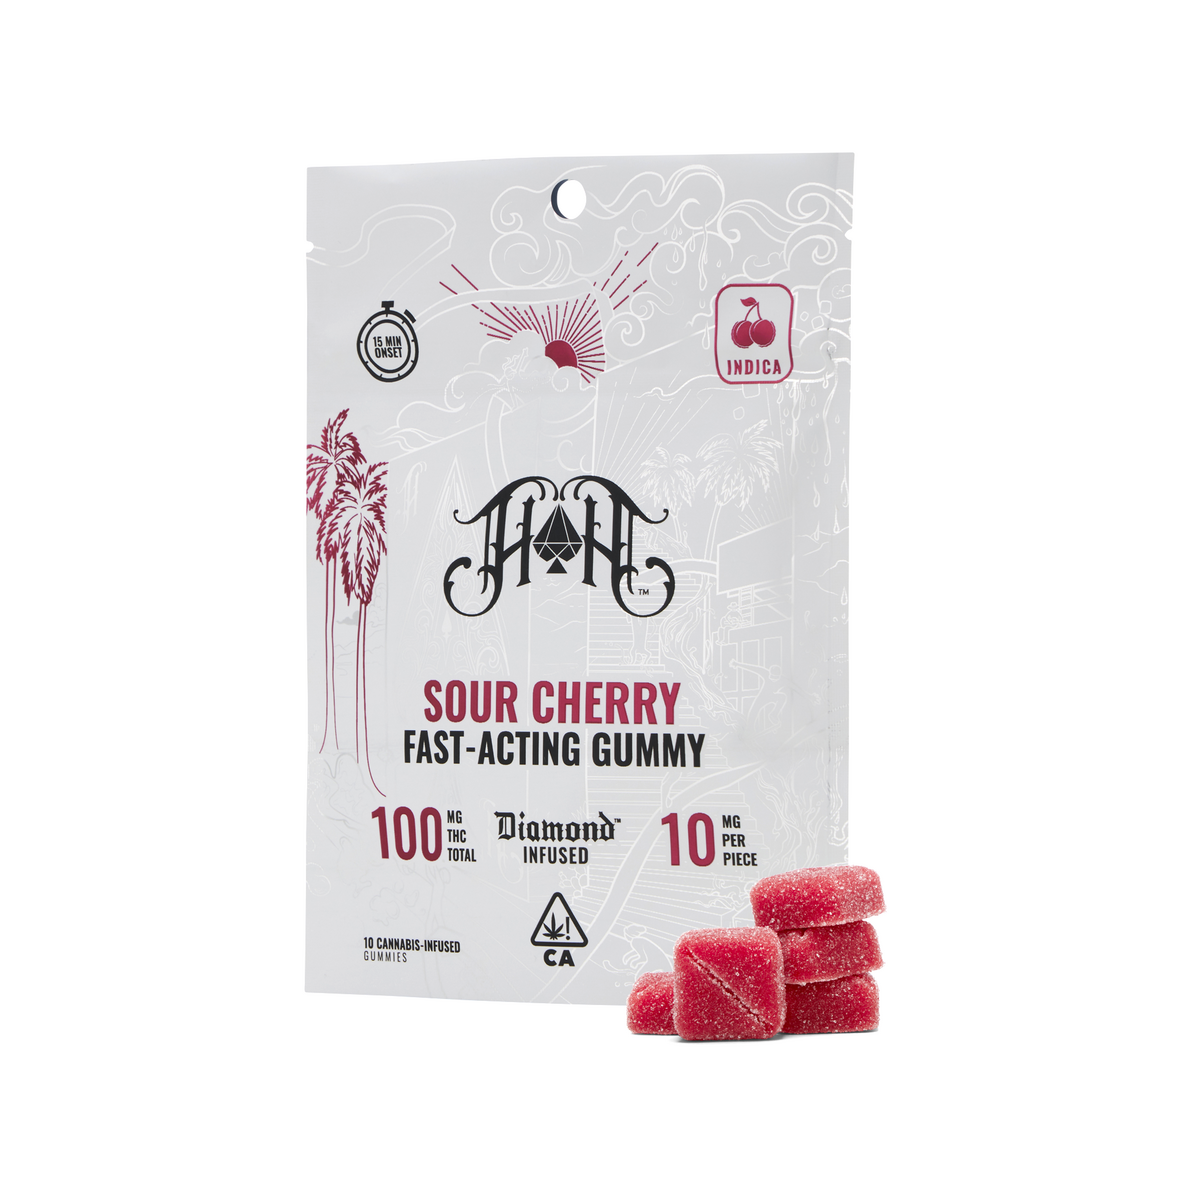 Sour Cherry | Indica - Fast-Acting Gummies - 100mg THC